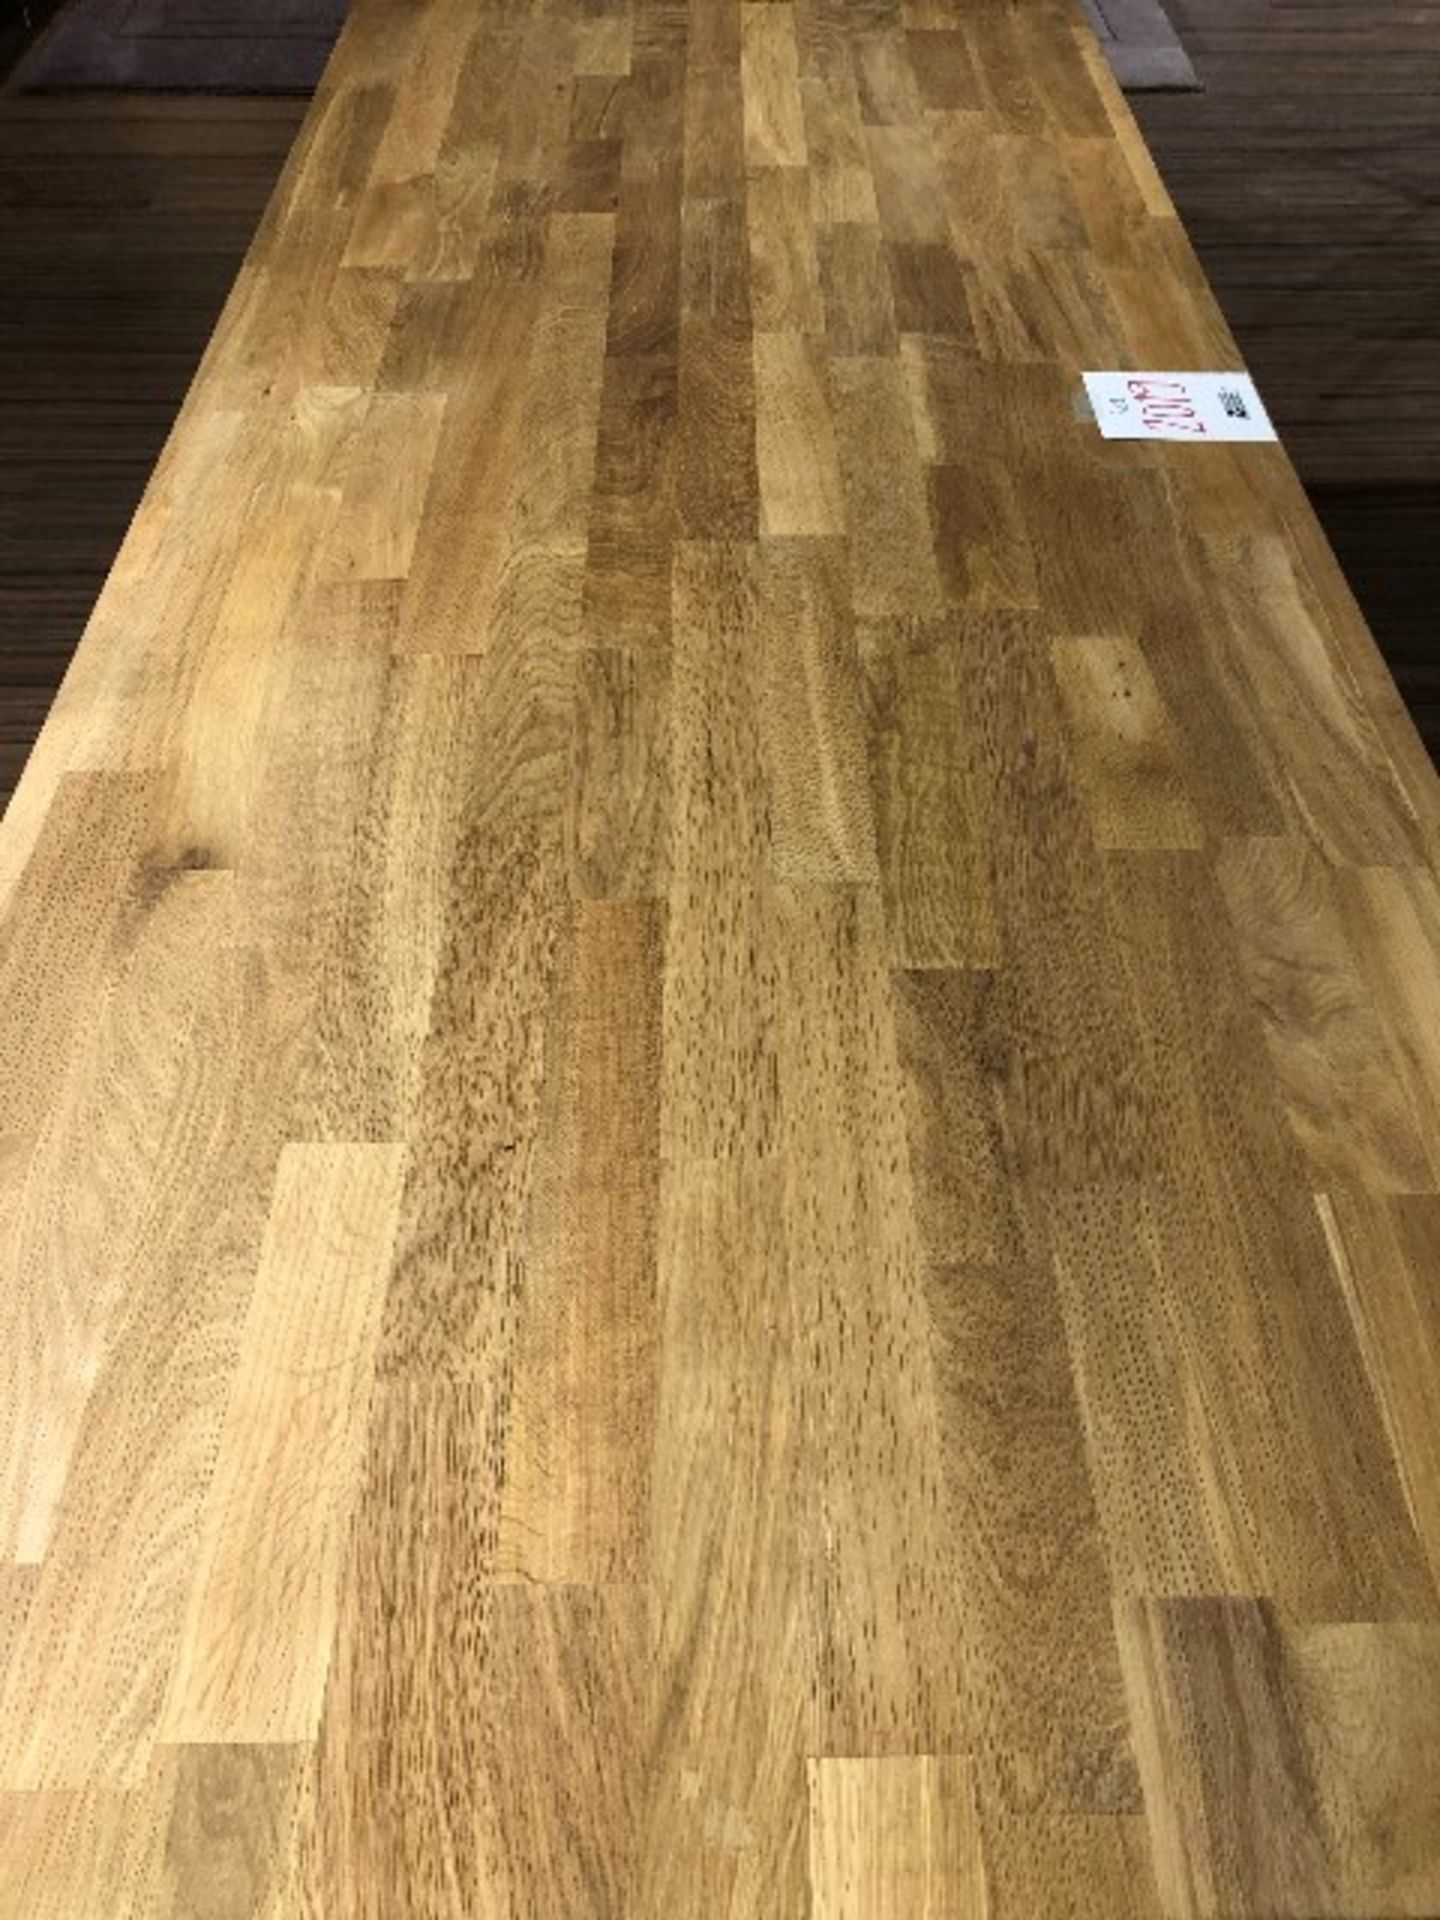 Butcher block style table w/metal base, 82”x35”x29” - Image 3 of 3